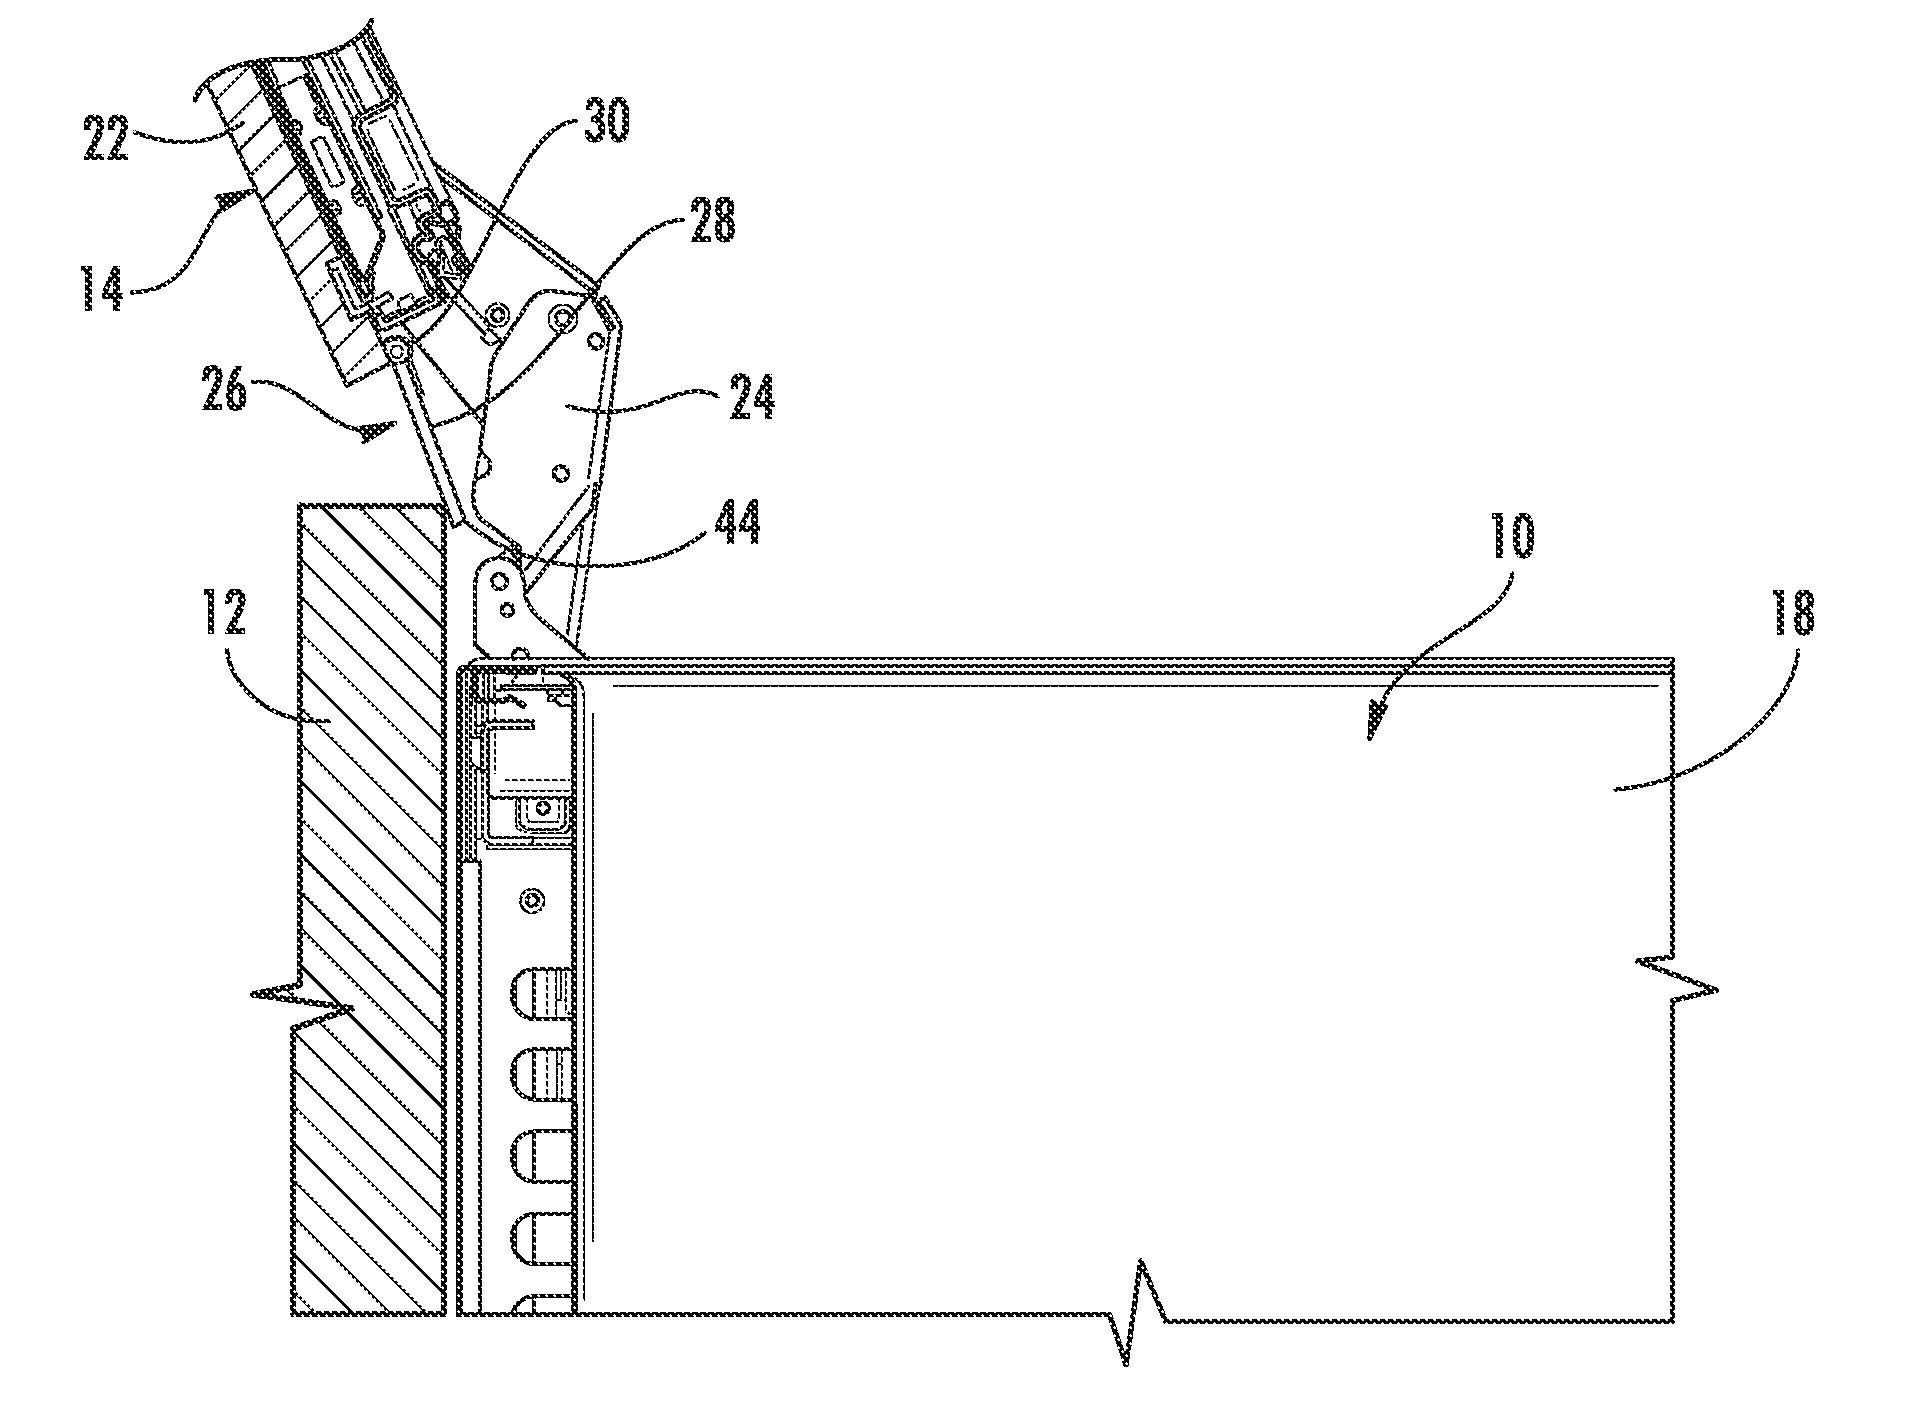 Consumer appliance with finger guard